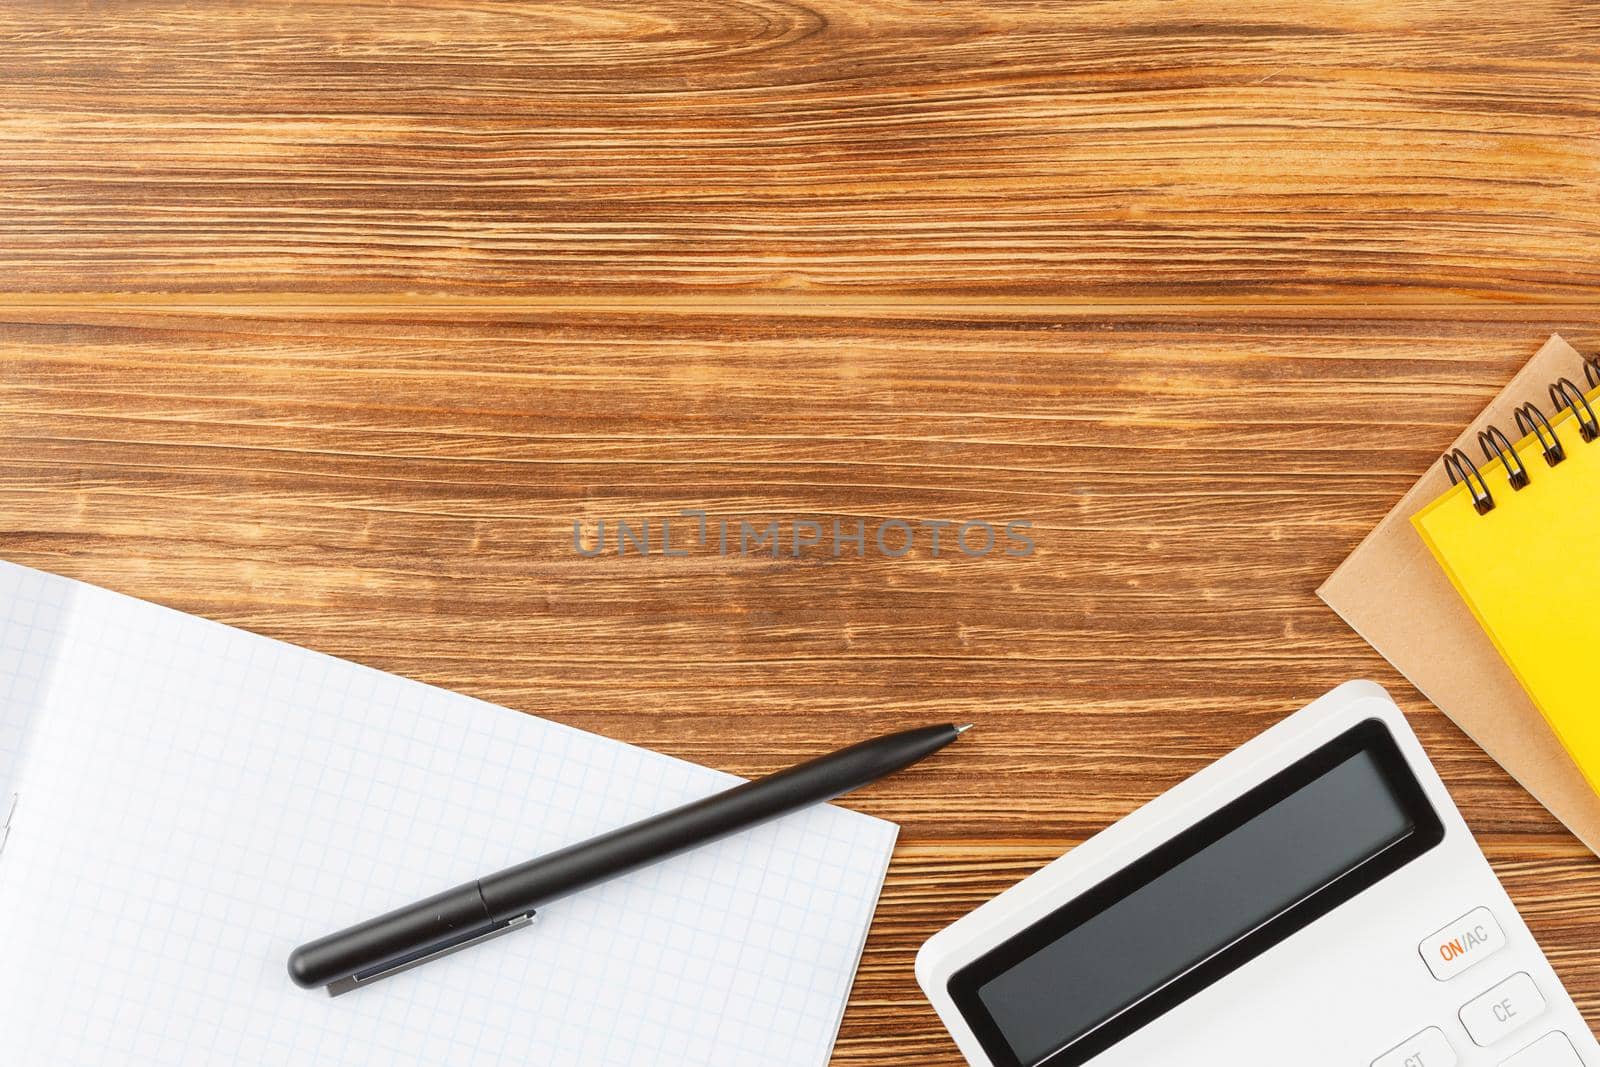 Open notebook with pen and calculator on wooden background. Study desk. Flat lay. Back to school concept. Top view.